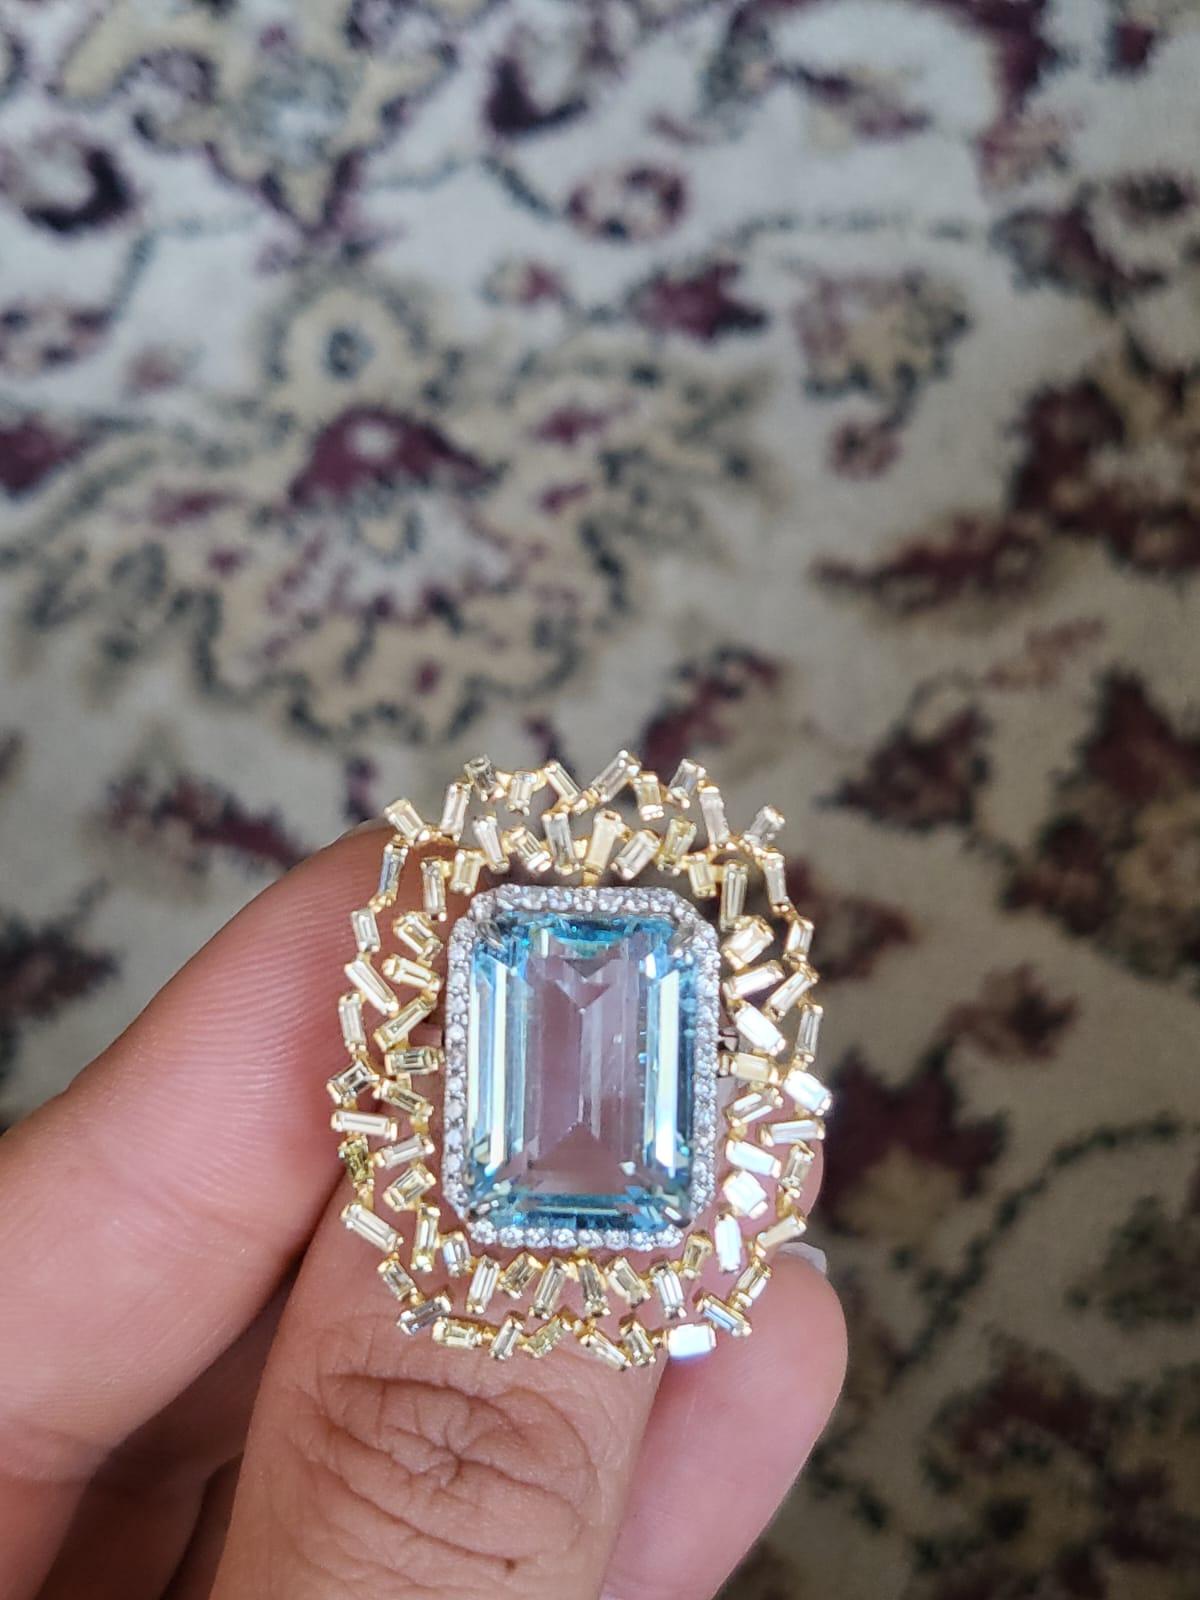 A very gorgeous and classic Aquamarine Cocktail Ring set in 18K White Gold & Diamonds. The weight of the Aquamarine is 11.56 carats. The combined weight of the Diamonds is 1.62 carats. The Yellow Baguette Diamonds is 1.30 carats. Net 18K Gold weight